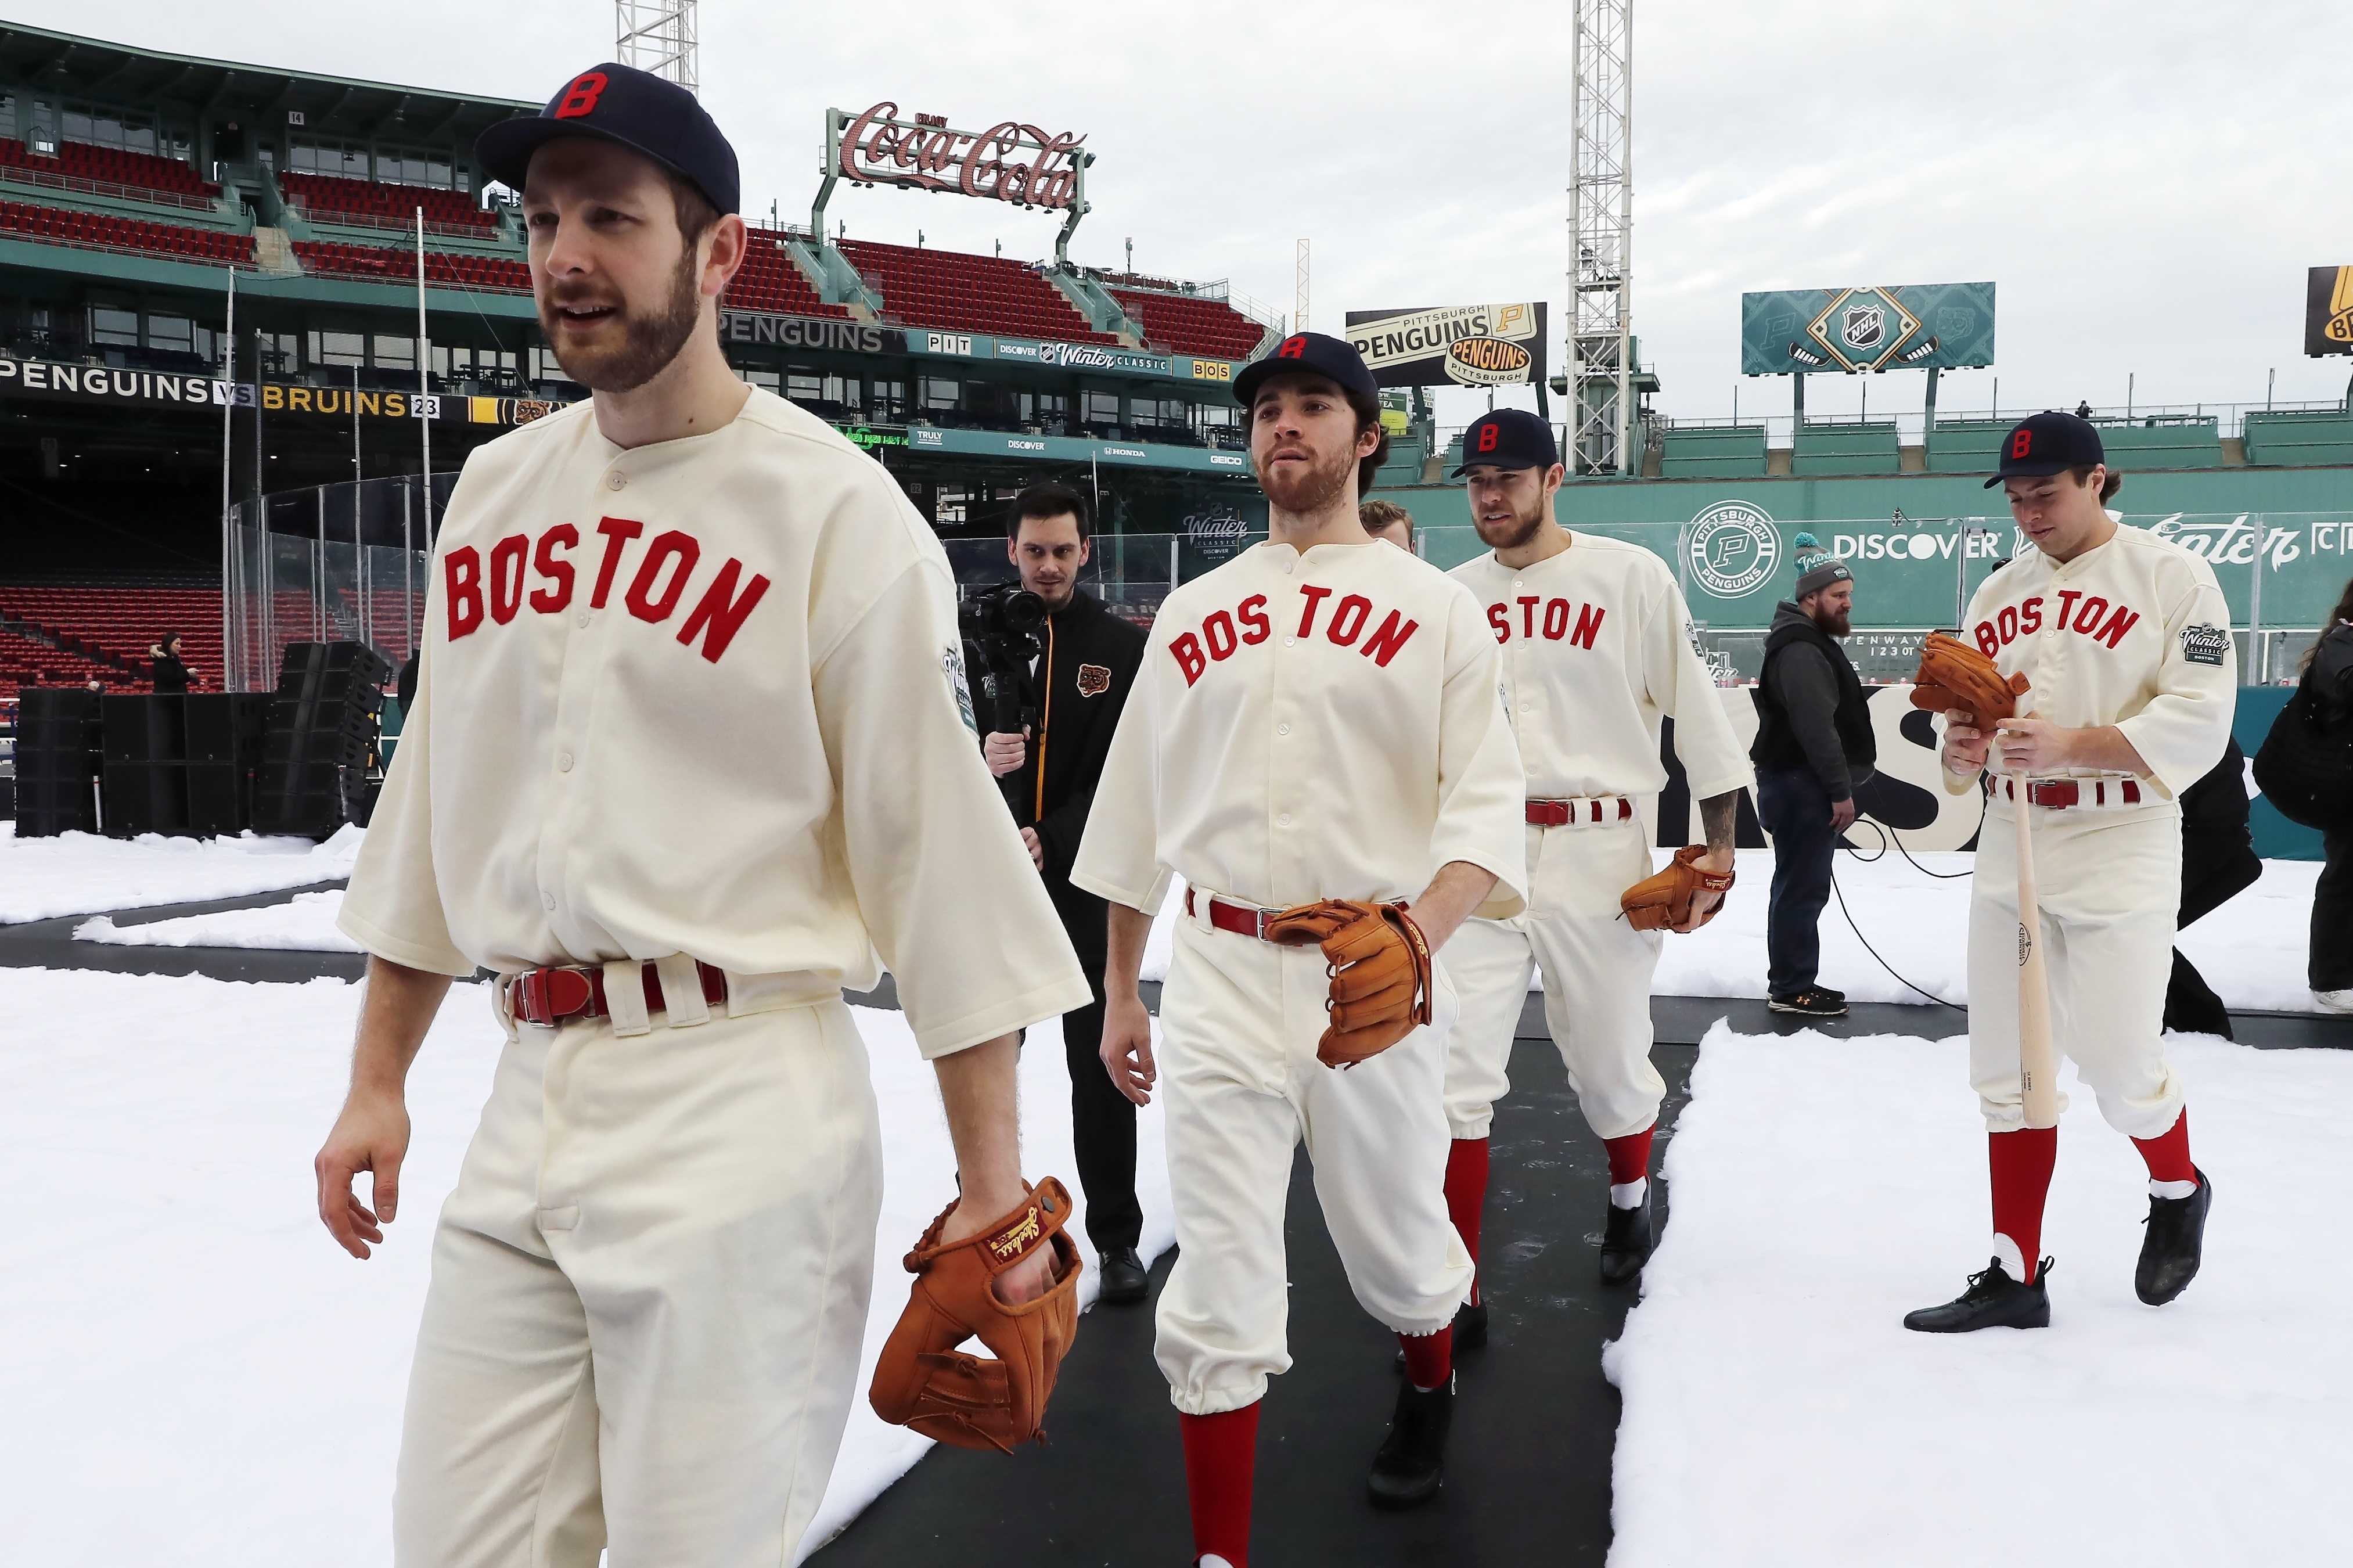 red sox uniforms over the years